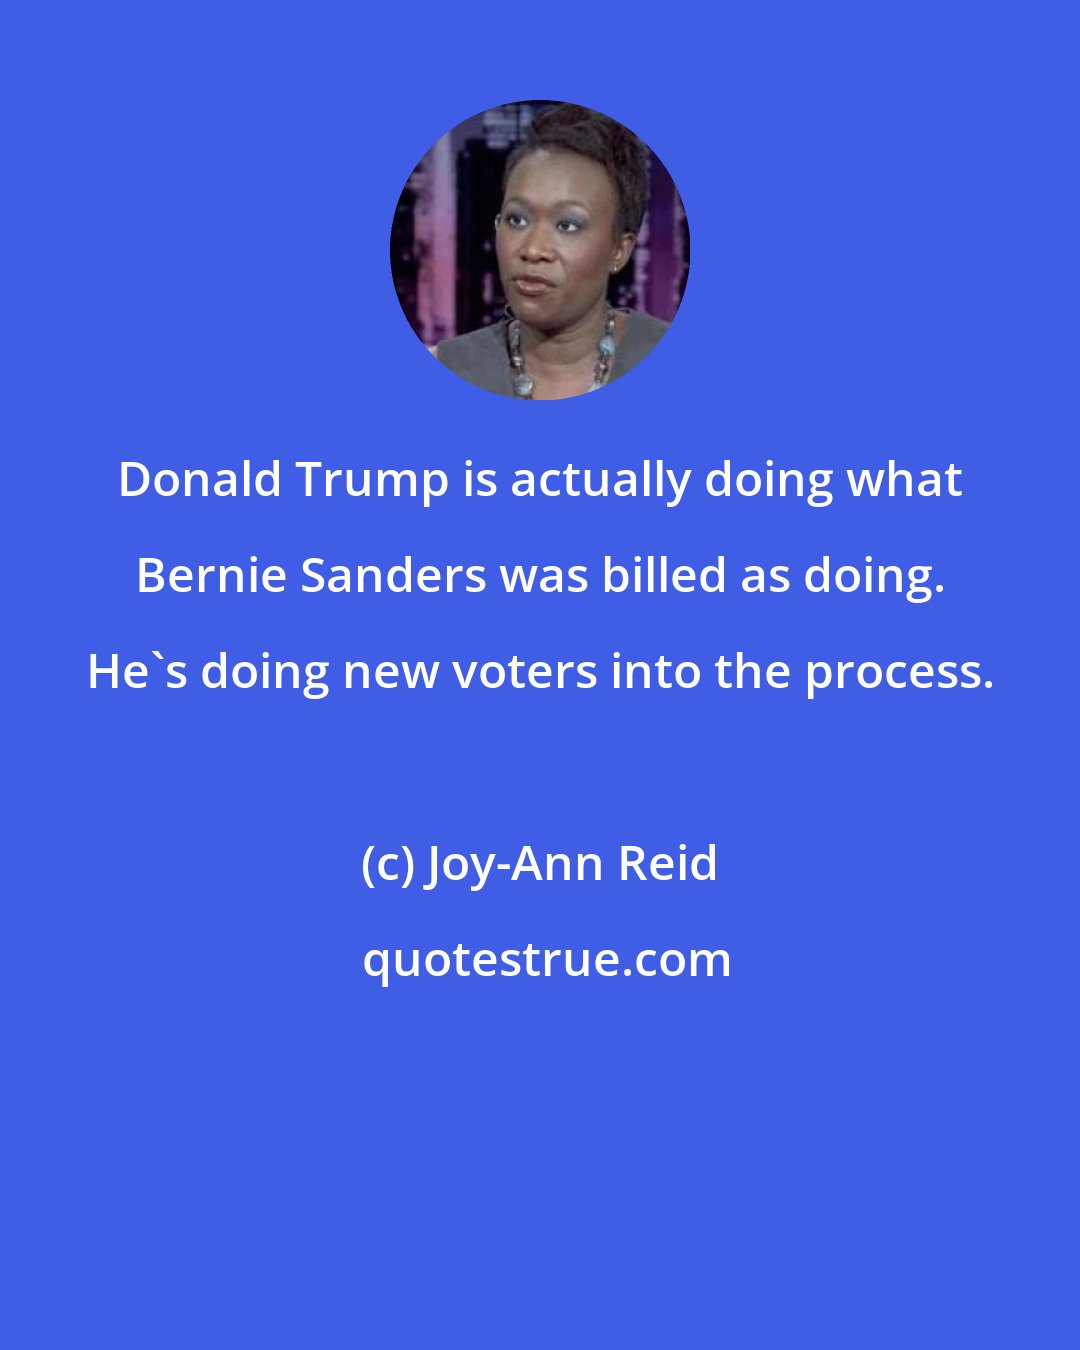 Joy-Ann Reid: Donald Trump is actually doing what Bernie Sanders was billed as doing. He's doing new voters into the process.